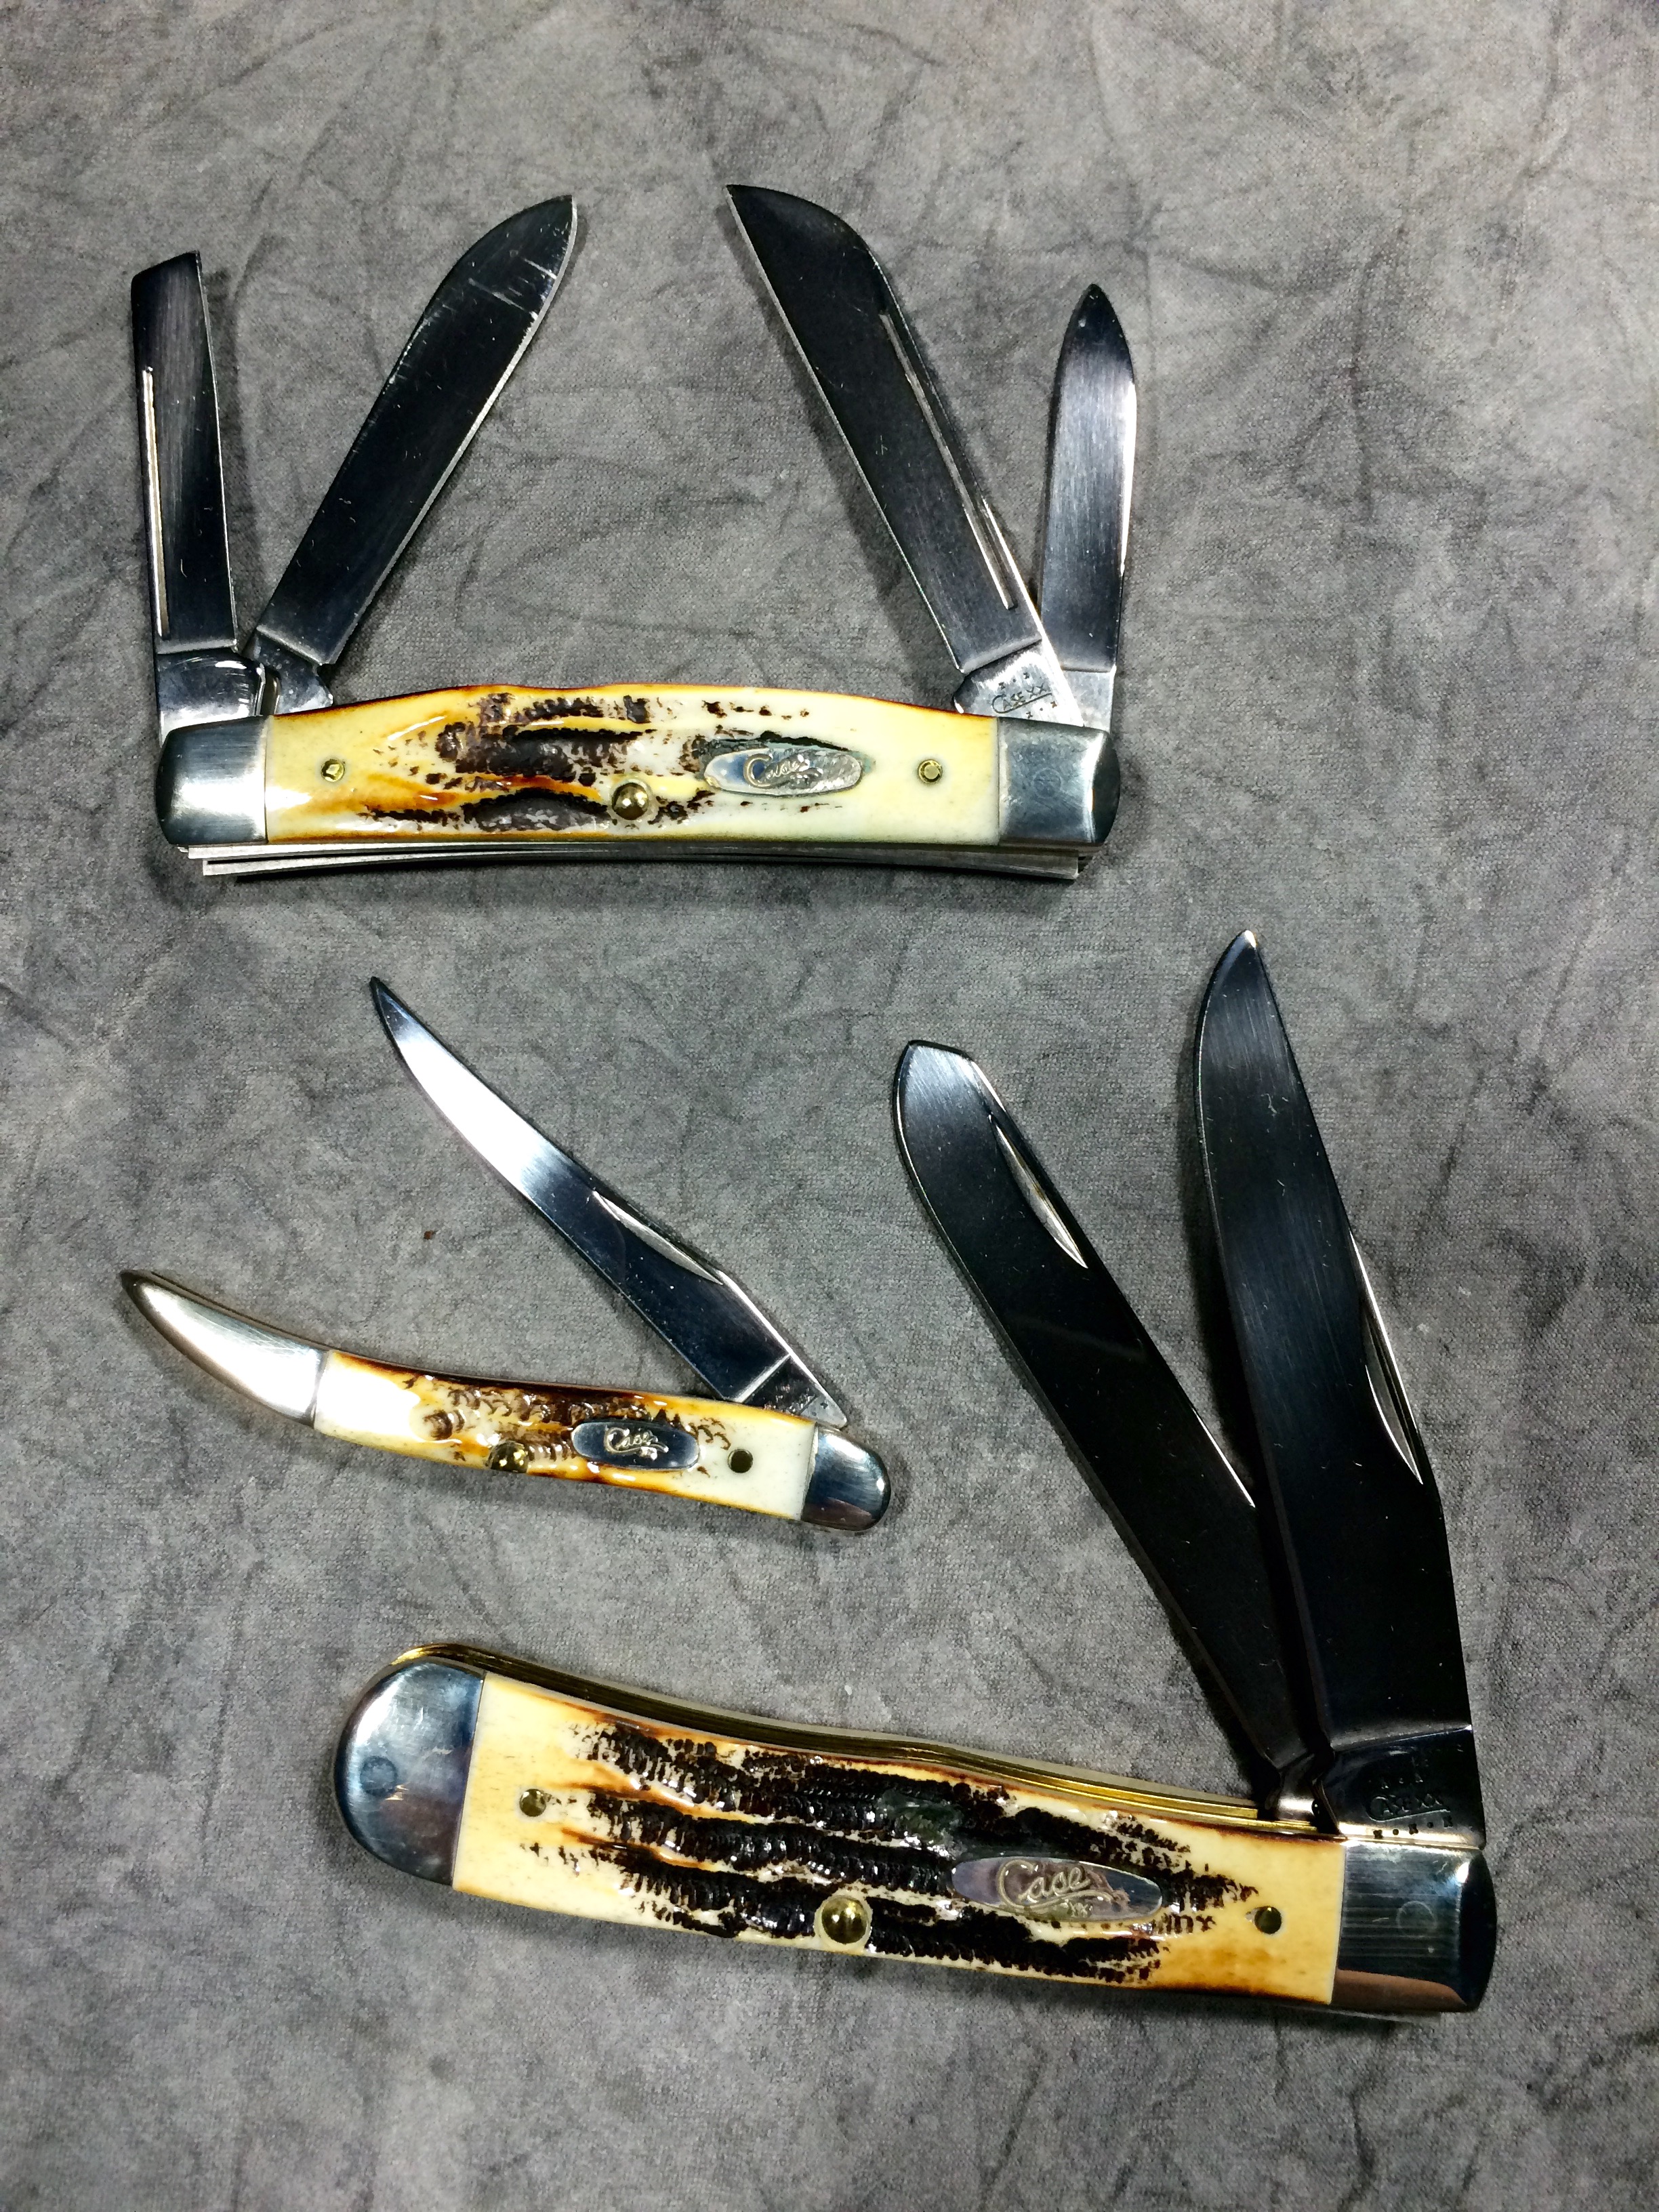 Sold at Auction: CASE XX COLLOCTOR SET WITH DEALER DISPLAY W/KNIFE SET  INCLUDES 8 POCKET KNIFES 2002